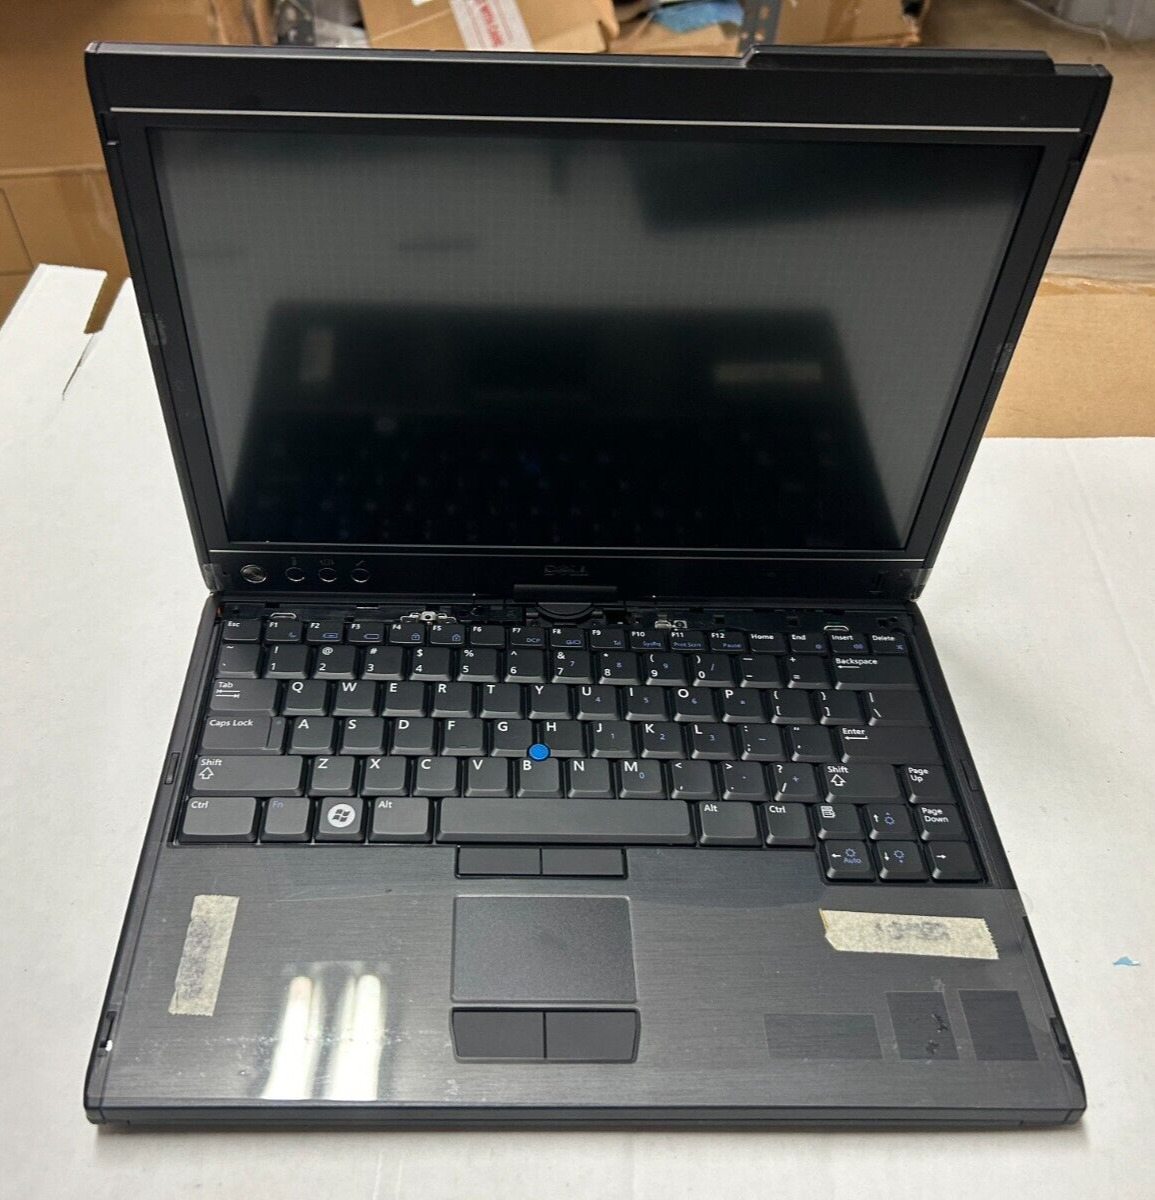 Dell Latitude XT2 PP12S 12.1” Laptop No Ram No HDD Missing Parts For parts only